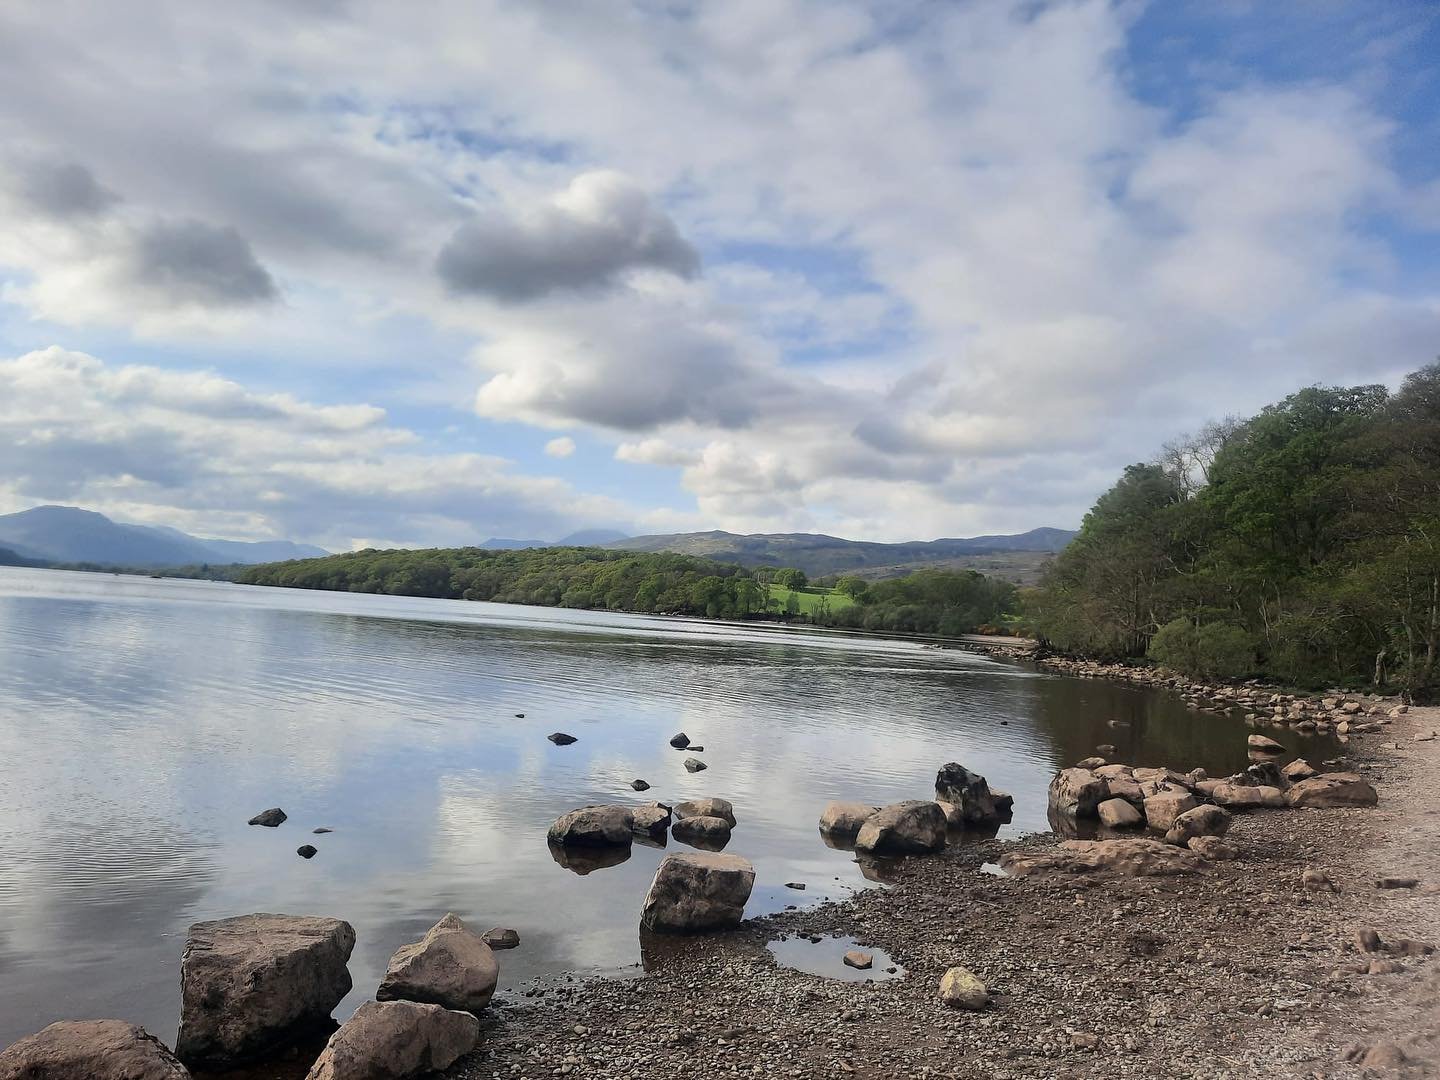 The views across Loch Lomond were truly spectacular during the last writing retreat at The Oak Tree Inn 🌞

It was so lovely to spend time outdoors enjoying the scenic beauty surrounding Balmaha to clear the mind and find inspiration in between writi